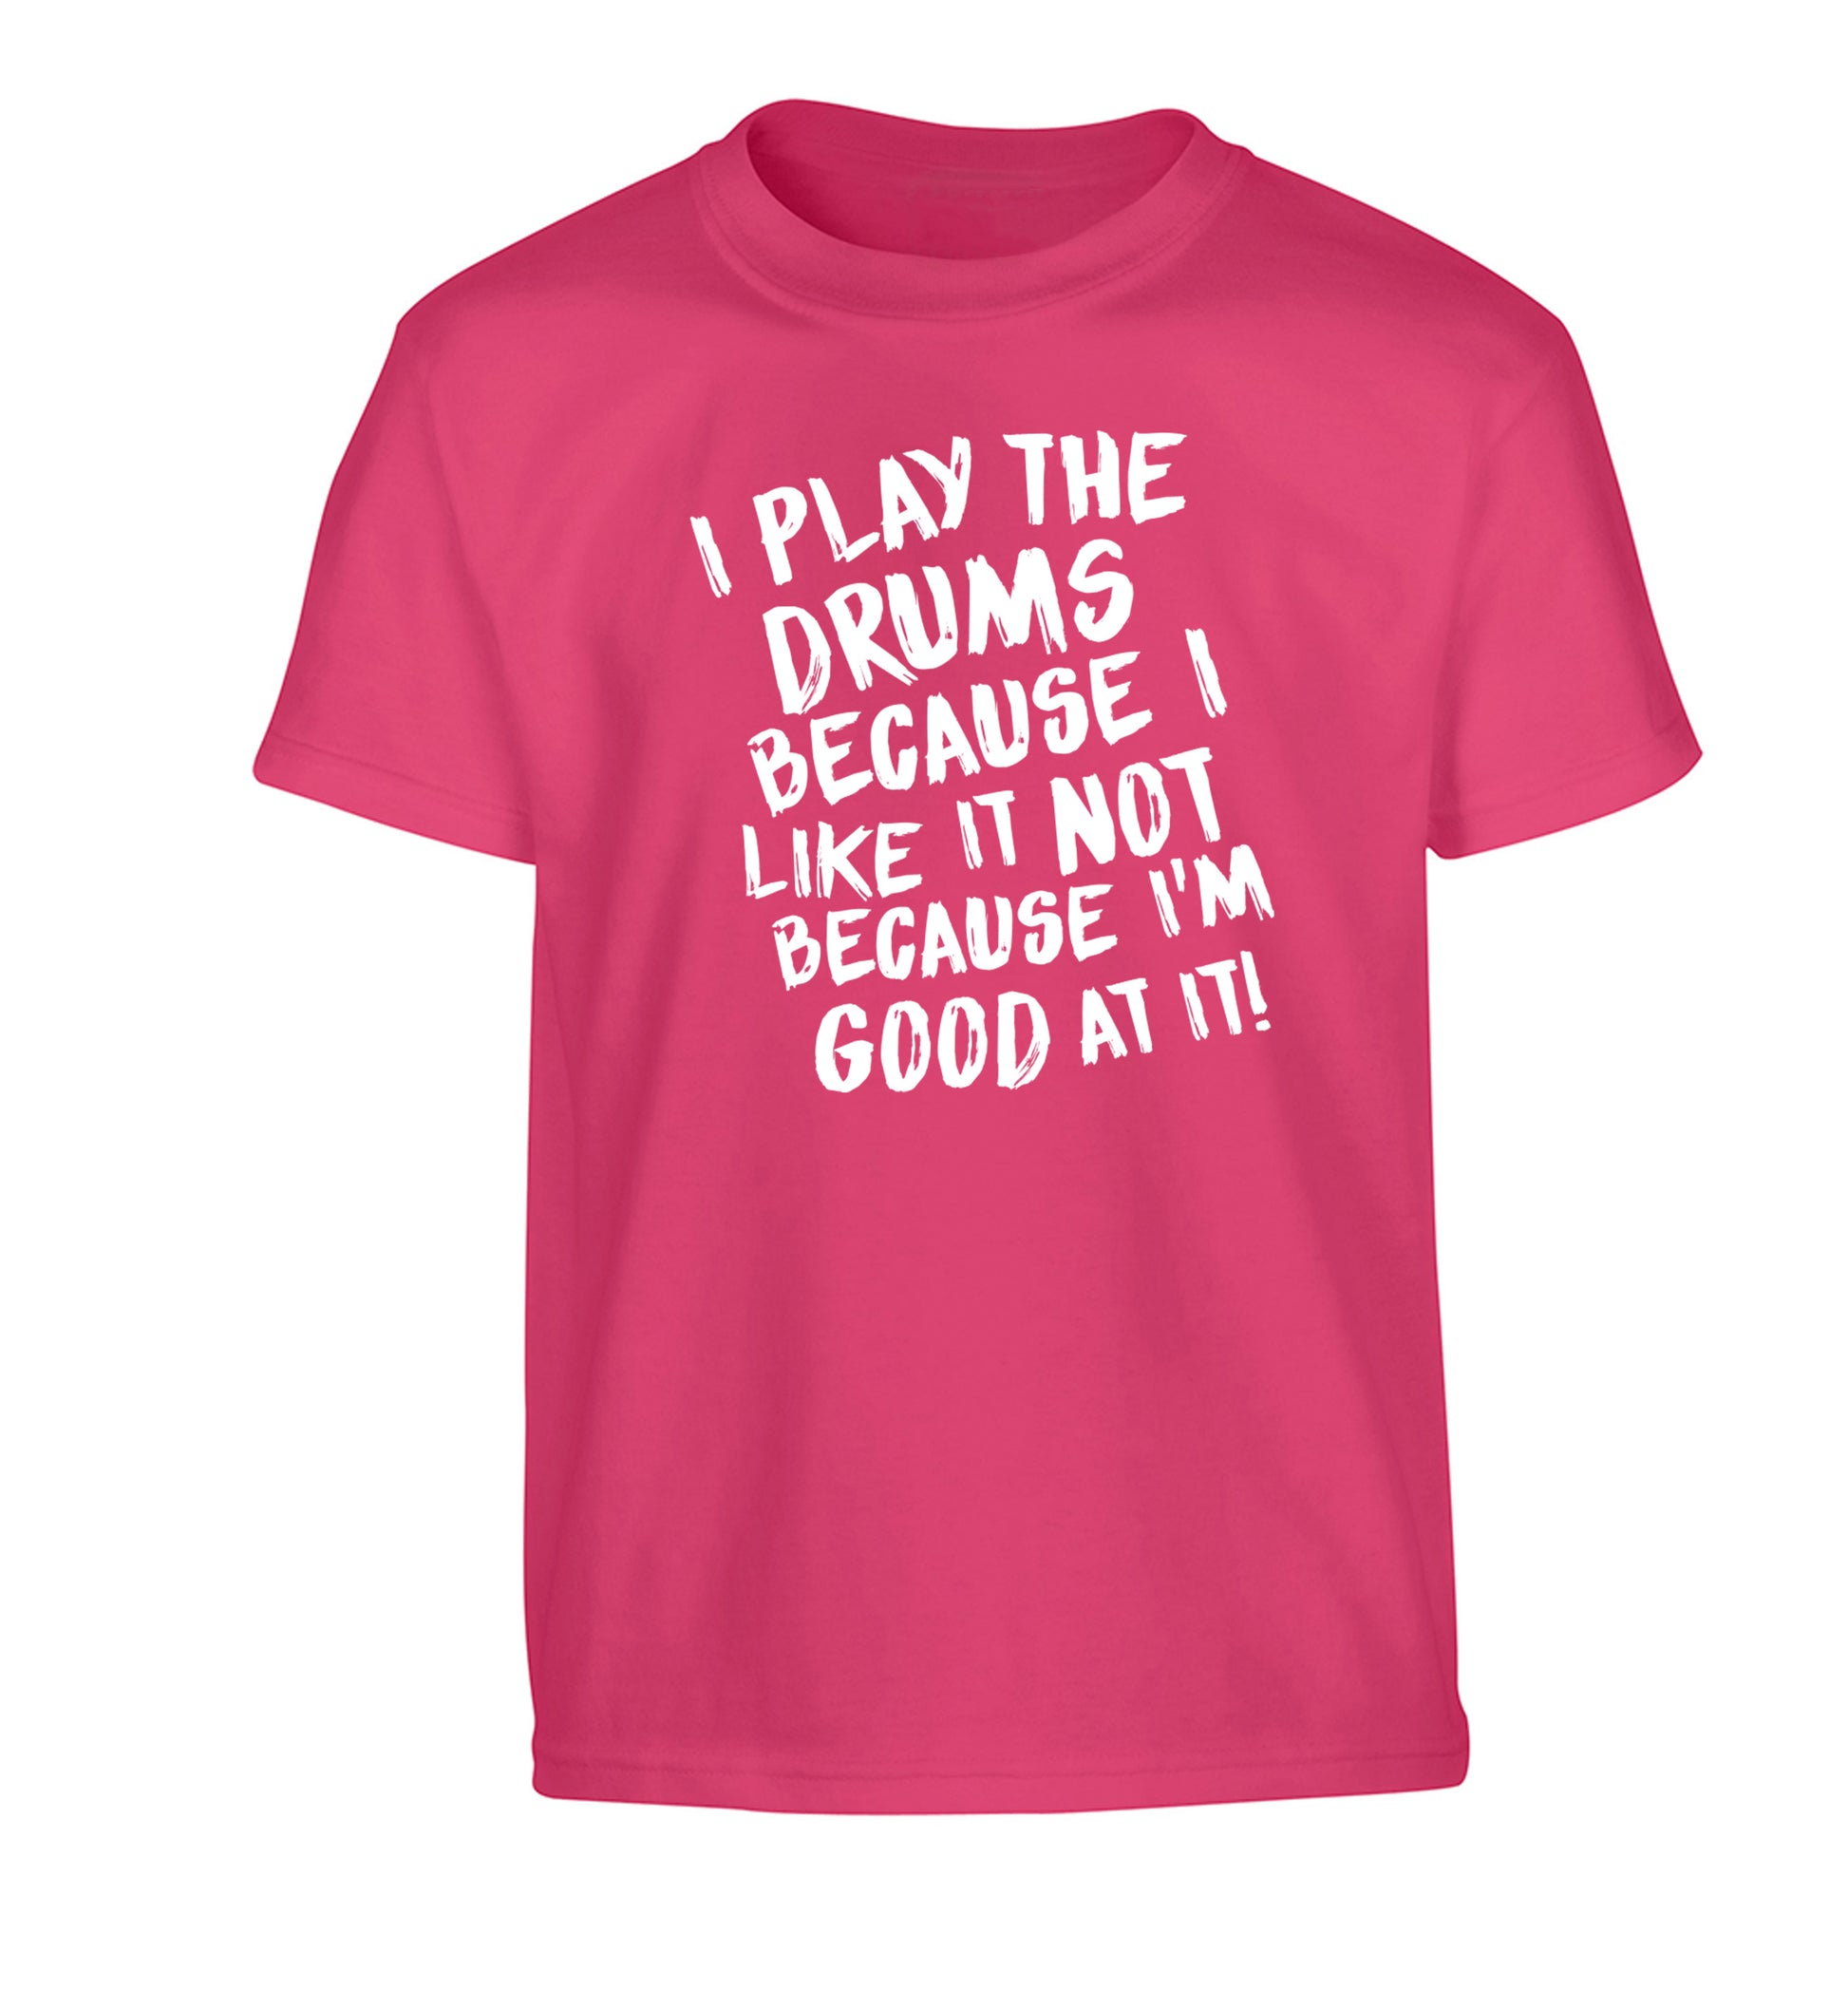 I play the drums because I like it not because I'm good at it Children's pink Tshirt 12-14 Years